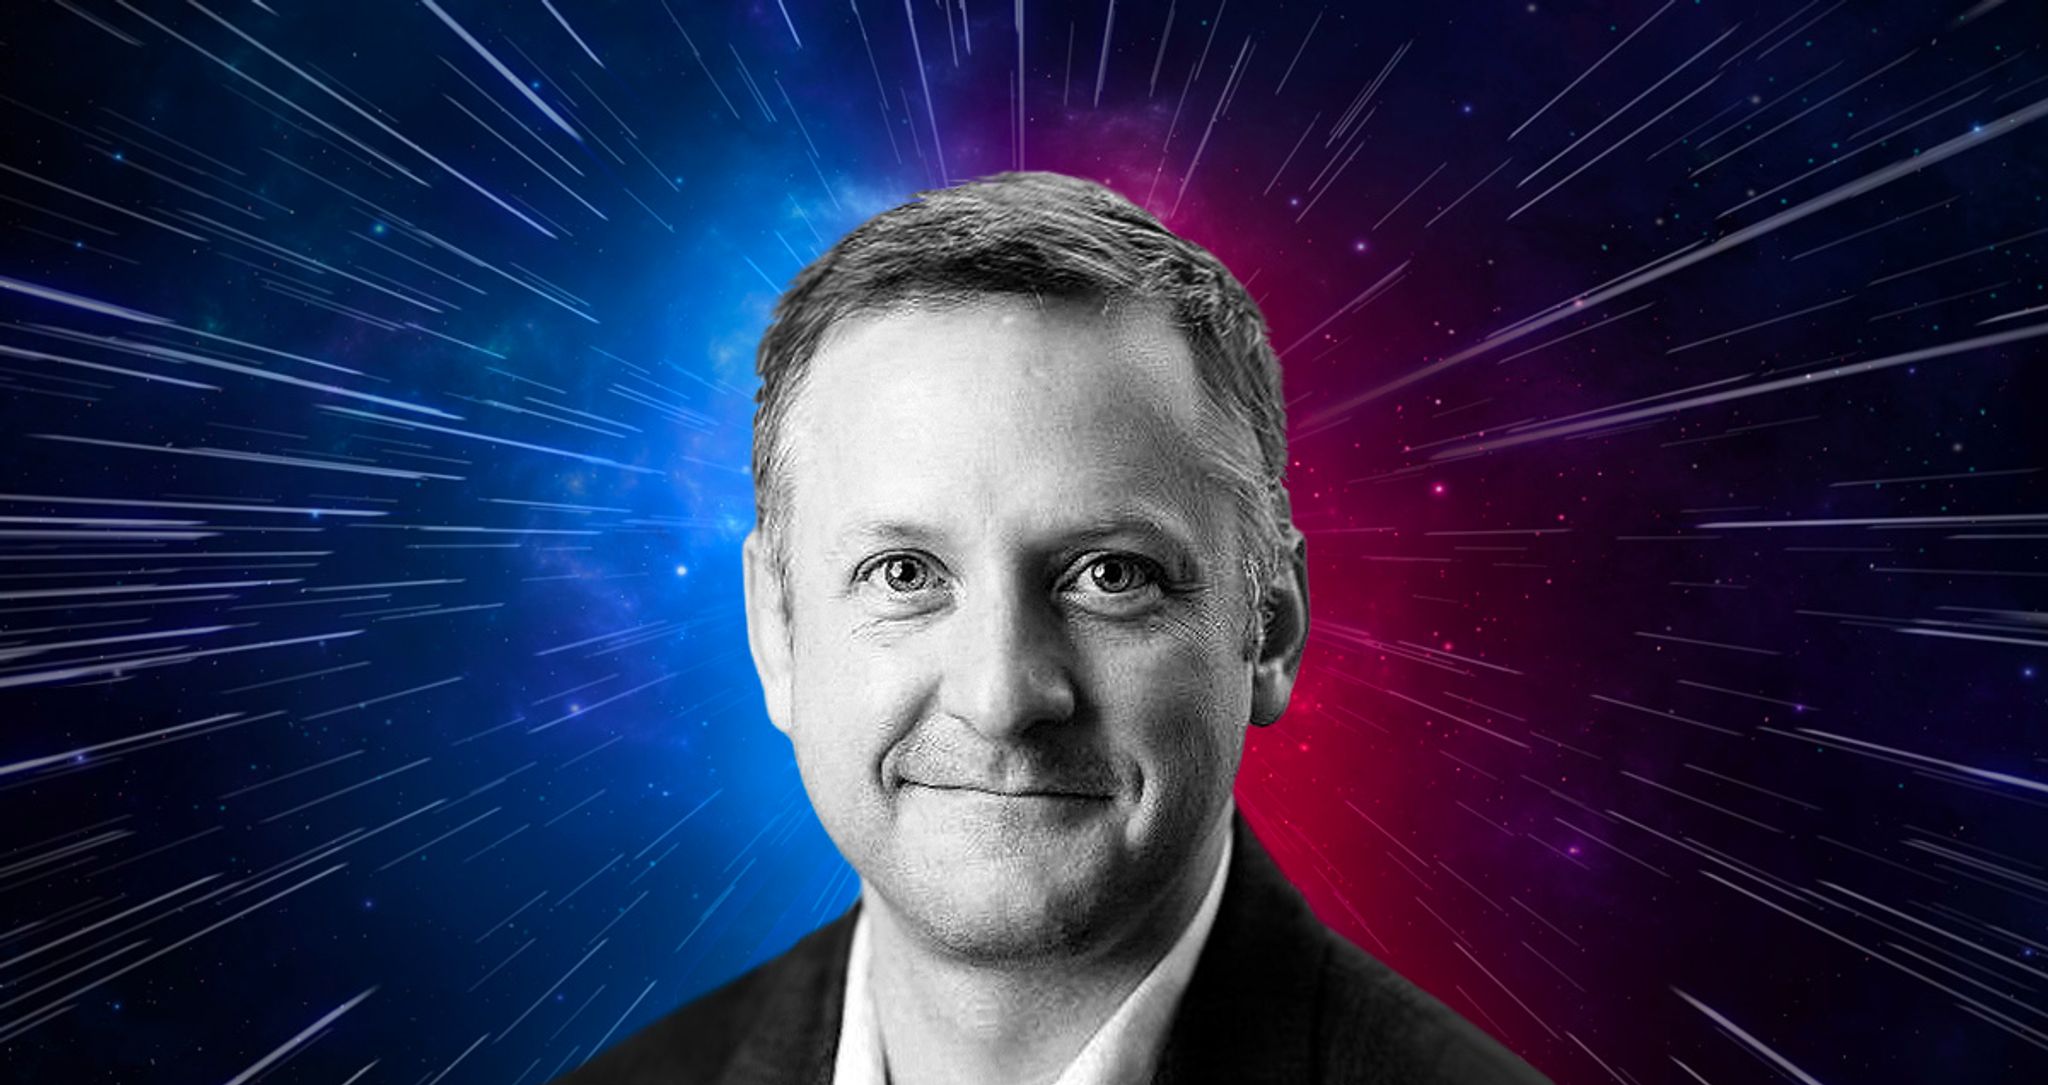 Mark Demeny featured image, a headshot against a space background with stars moving at warp speed